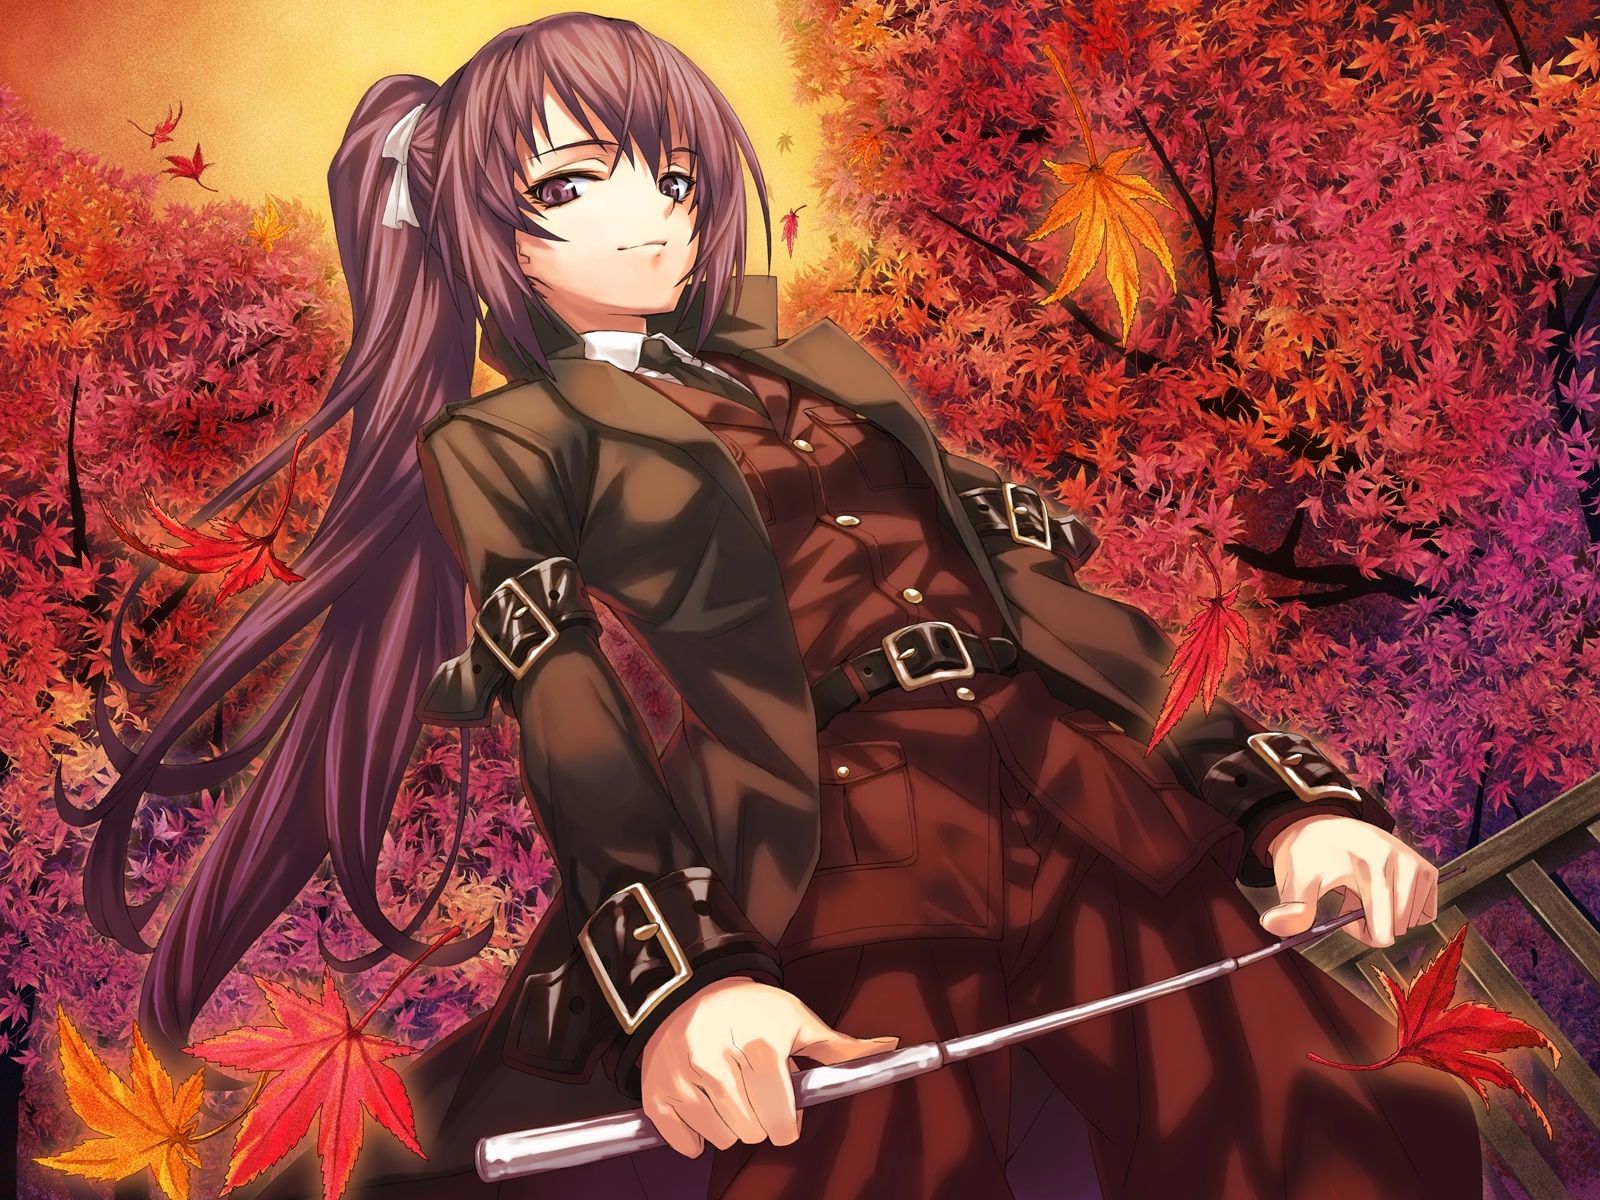 Wallpaper Purple hair anime girl, maple tree, red leaves, autumn 1600x1200 HD Picture, Image